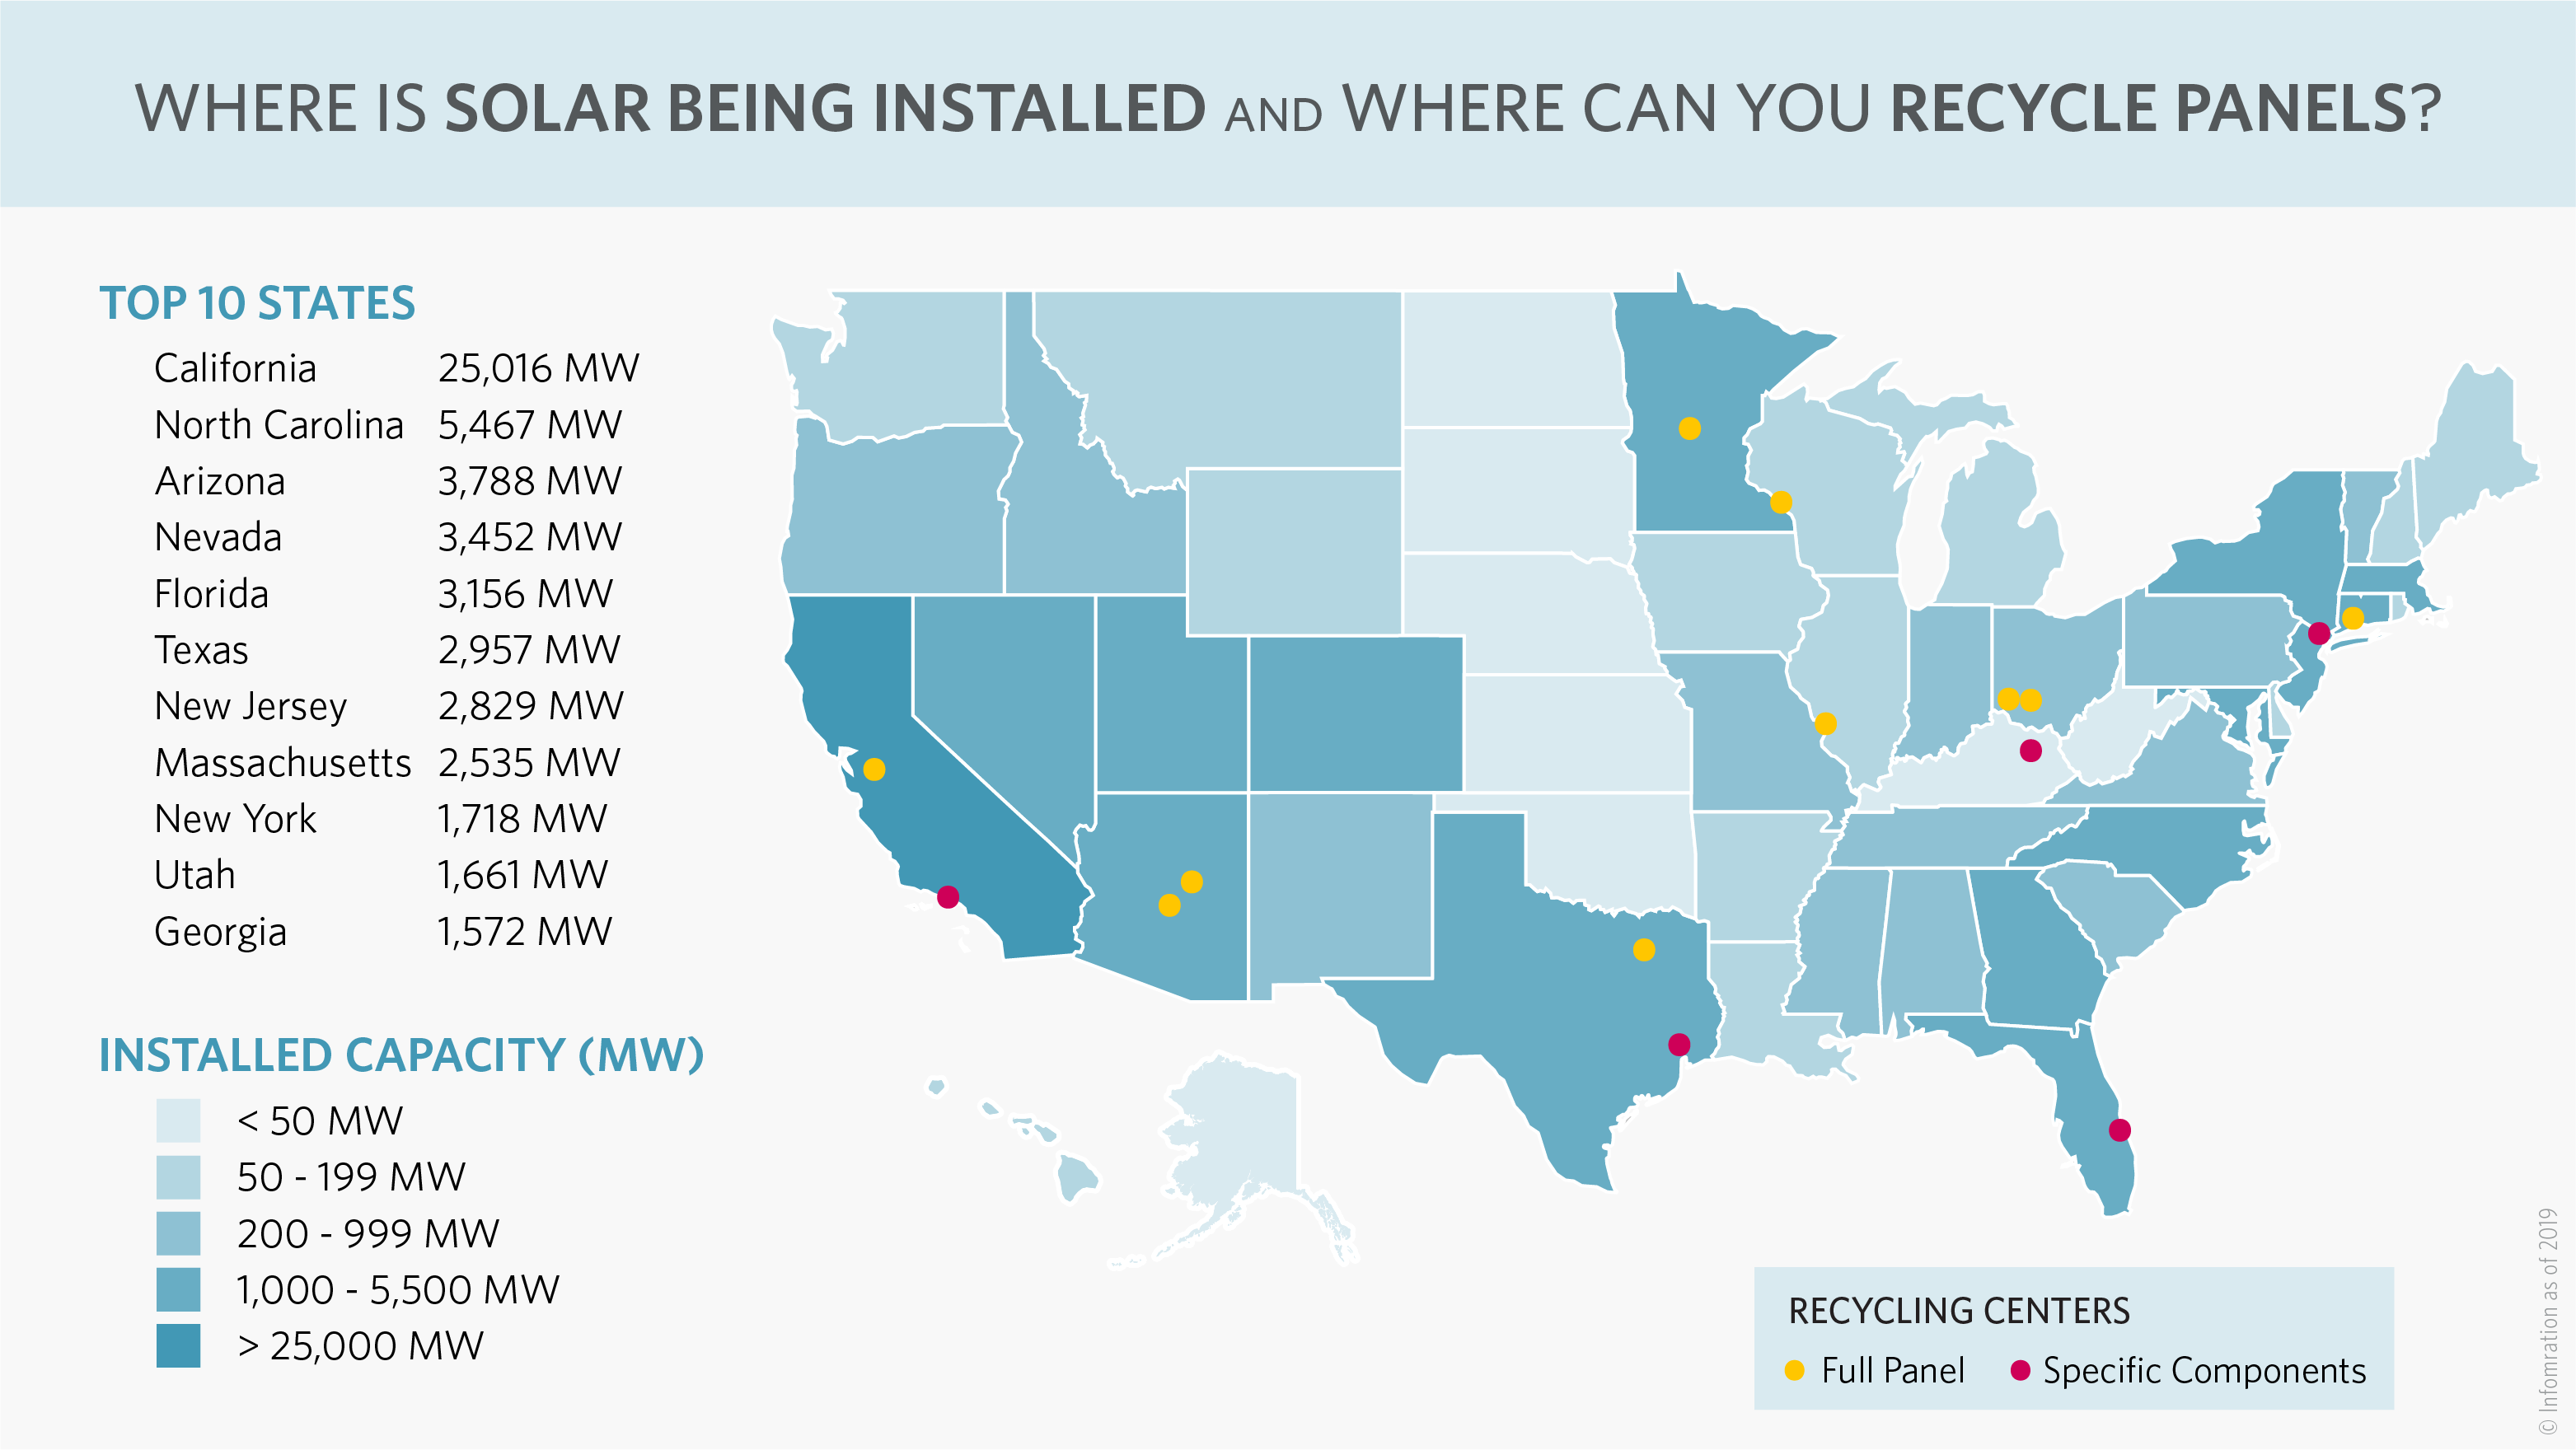 Solar Installation Sites and Recycling Center Locations Map